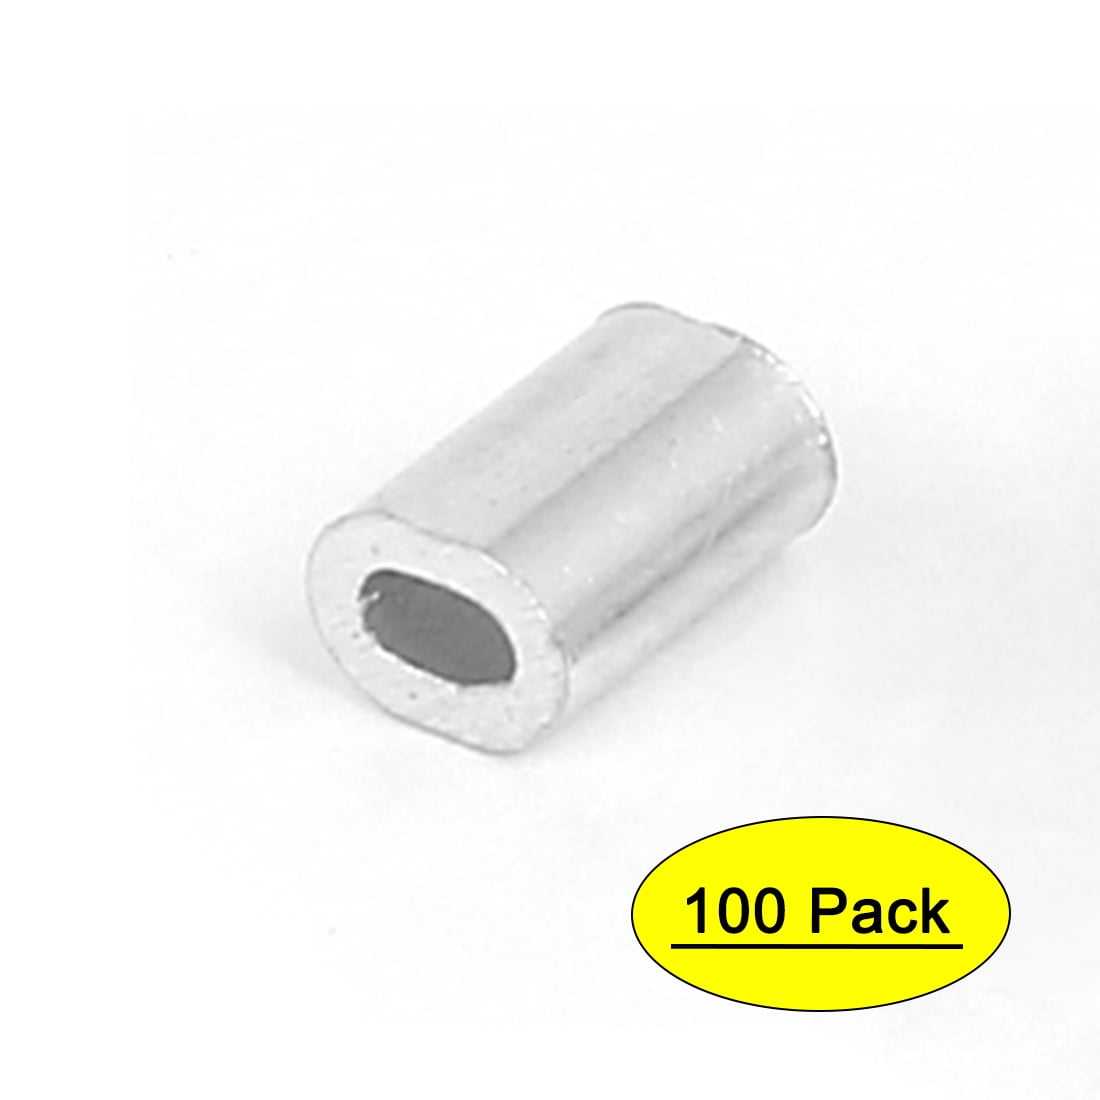 250 Aluminum 1/8" Sleeves Garage Overhead Door Cable Wire Swage Quality Parts 